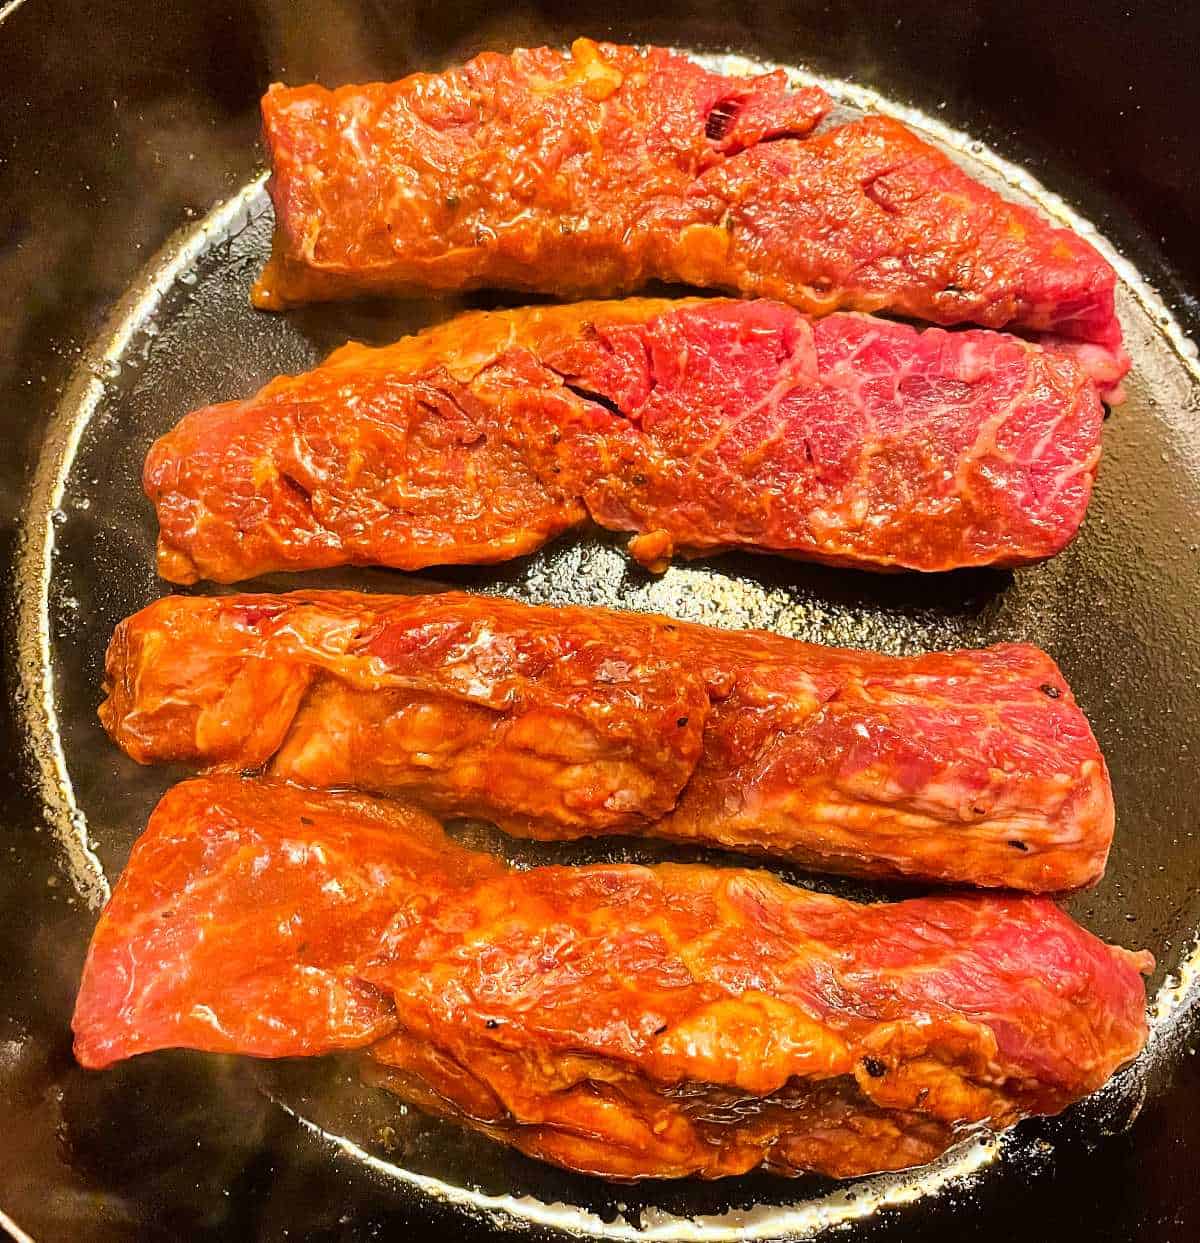 steak tips getting seared in a black cast iron skillet.